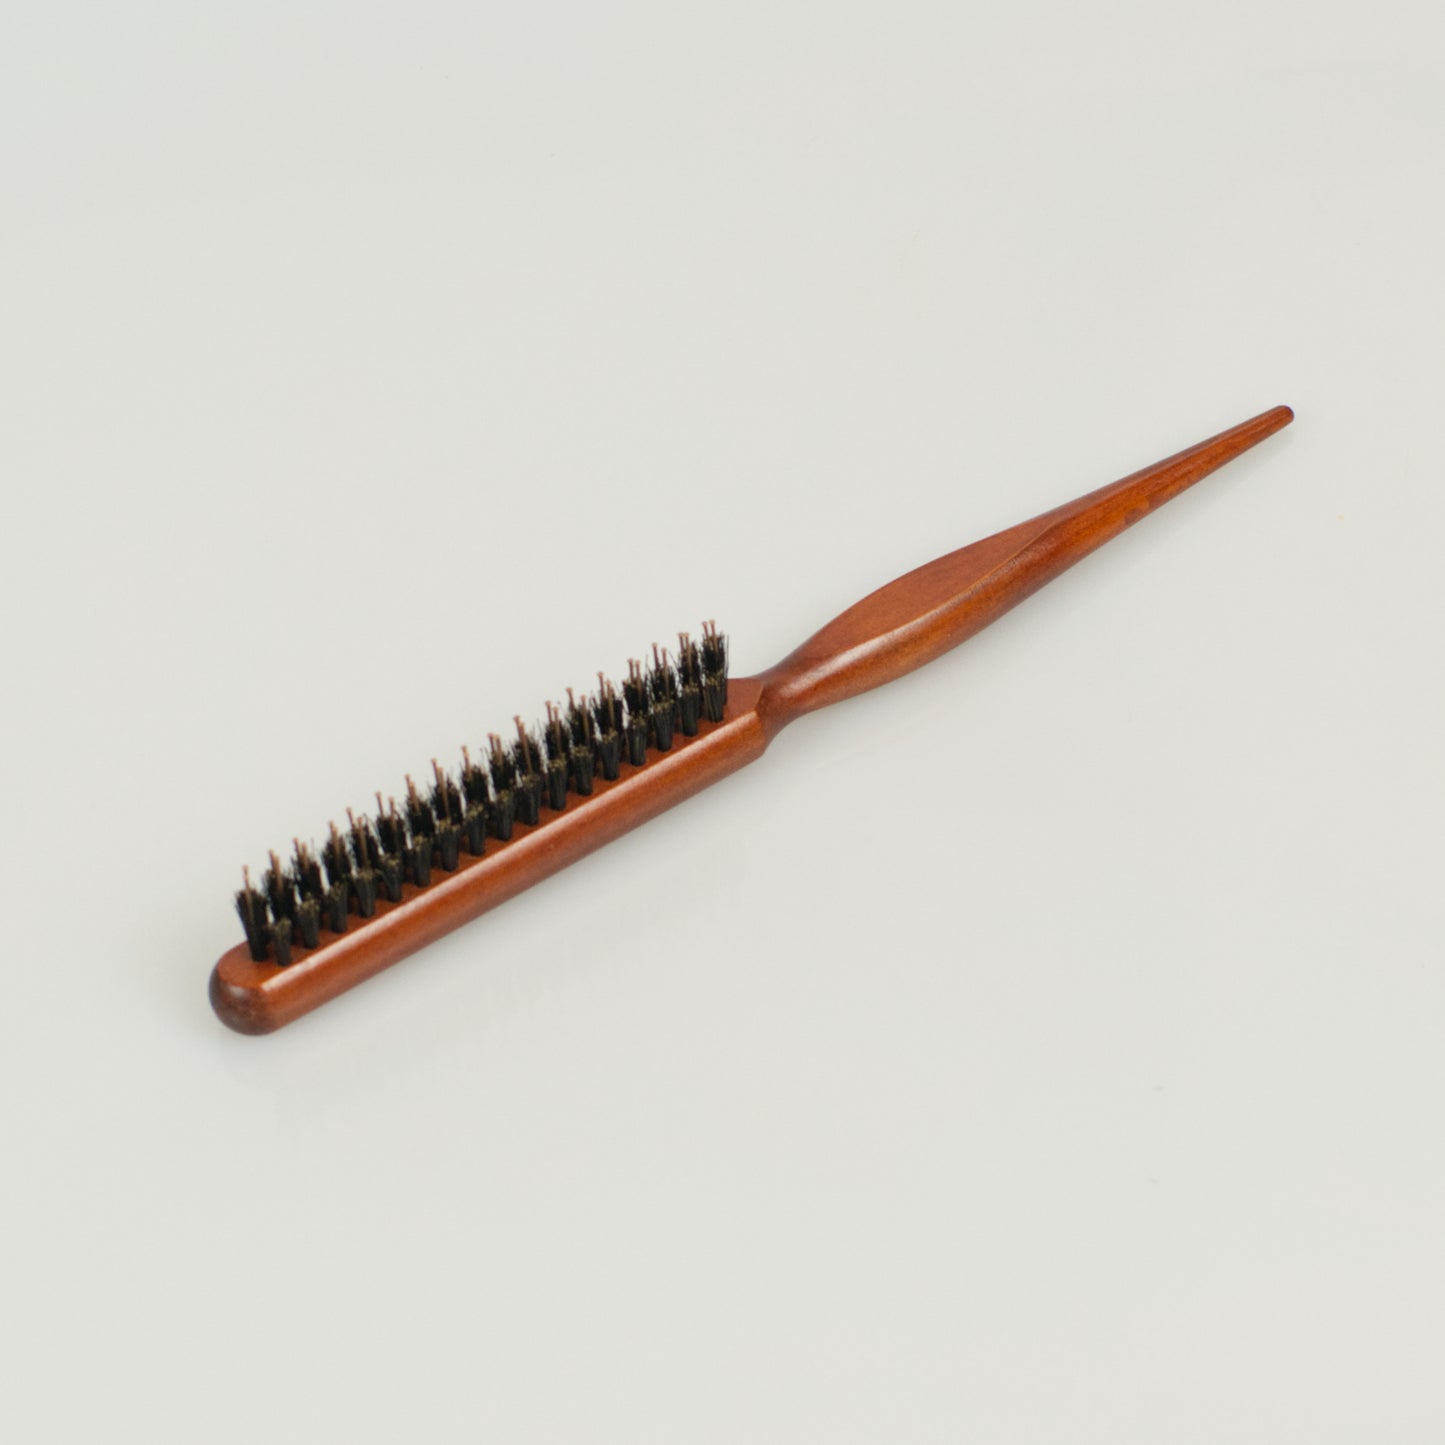 Precision tease and smooth brush